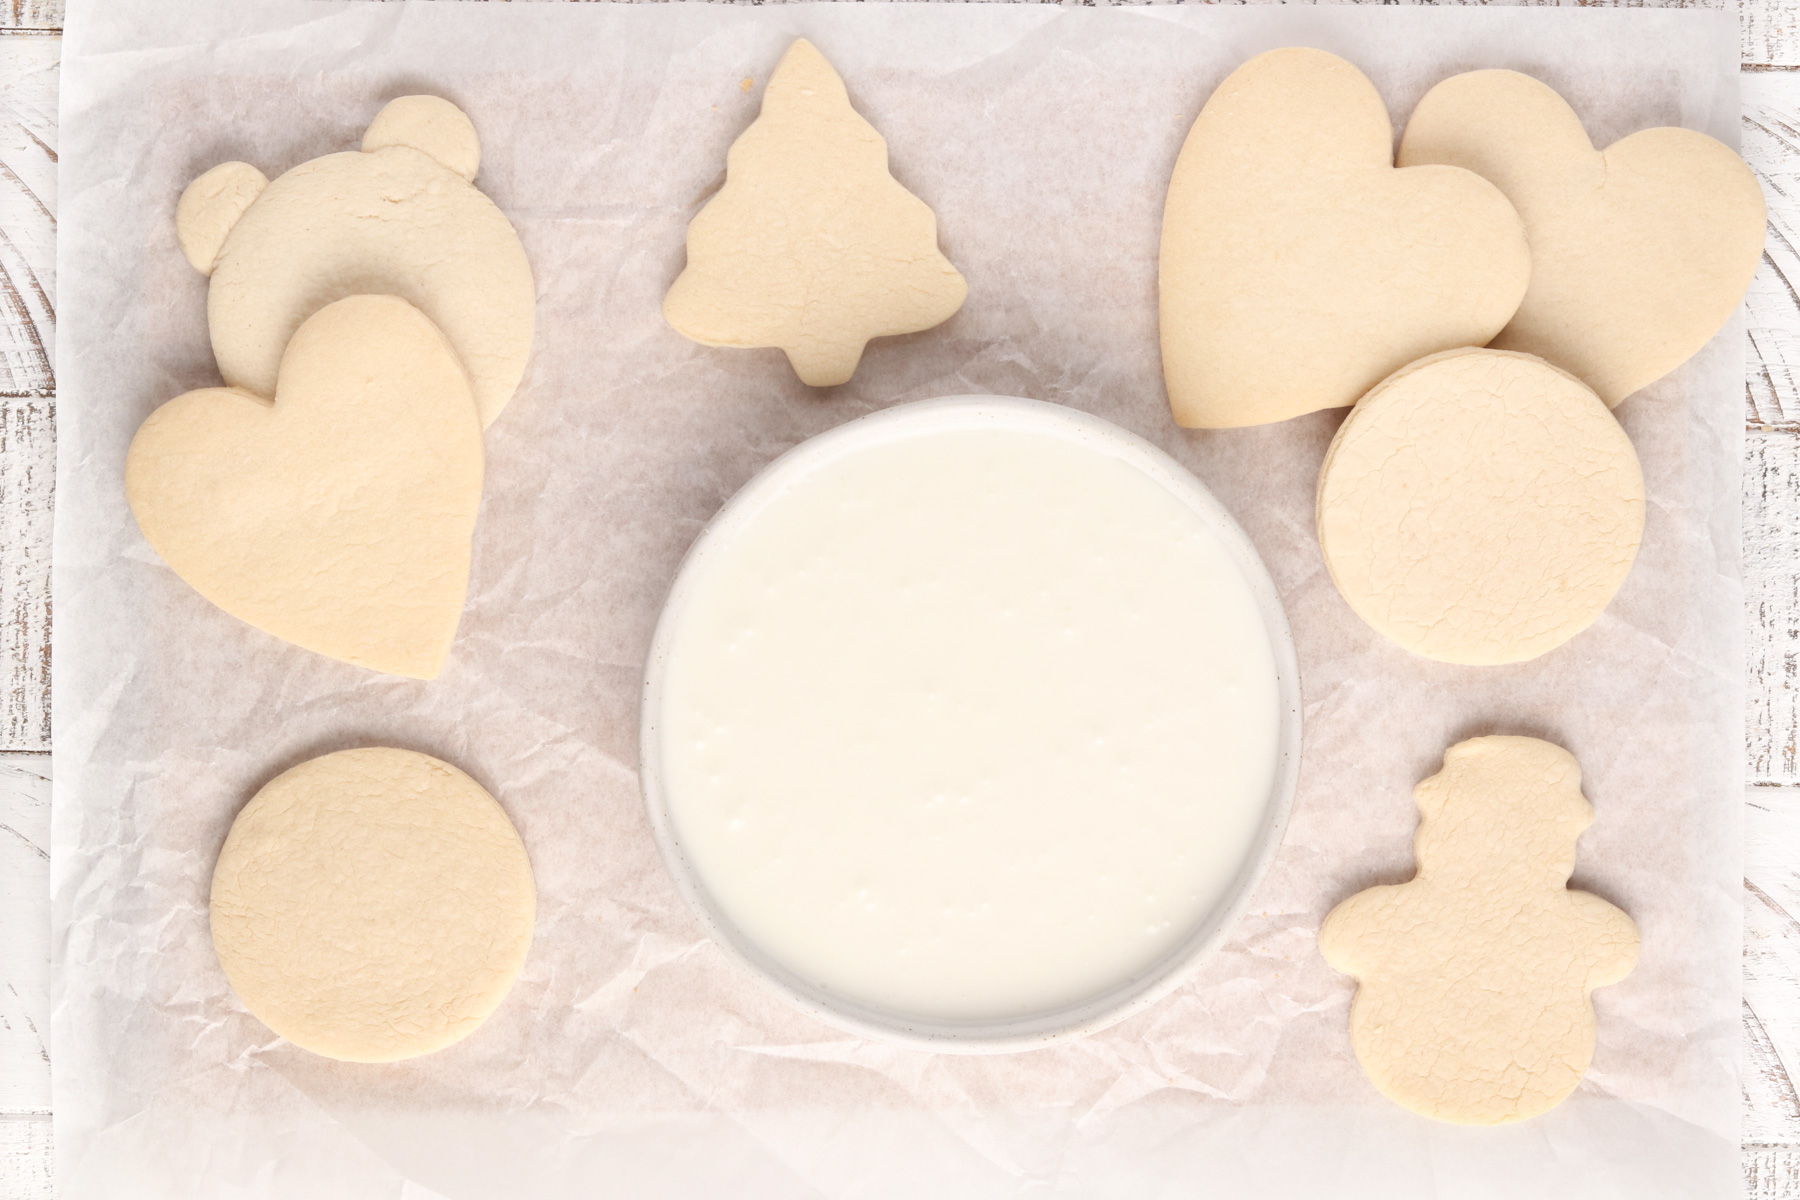 Step 1: Paint Your Own Cookies. Prepare royal icing and cutout cookies.